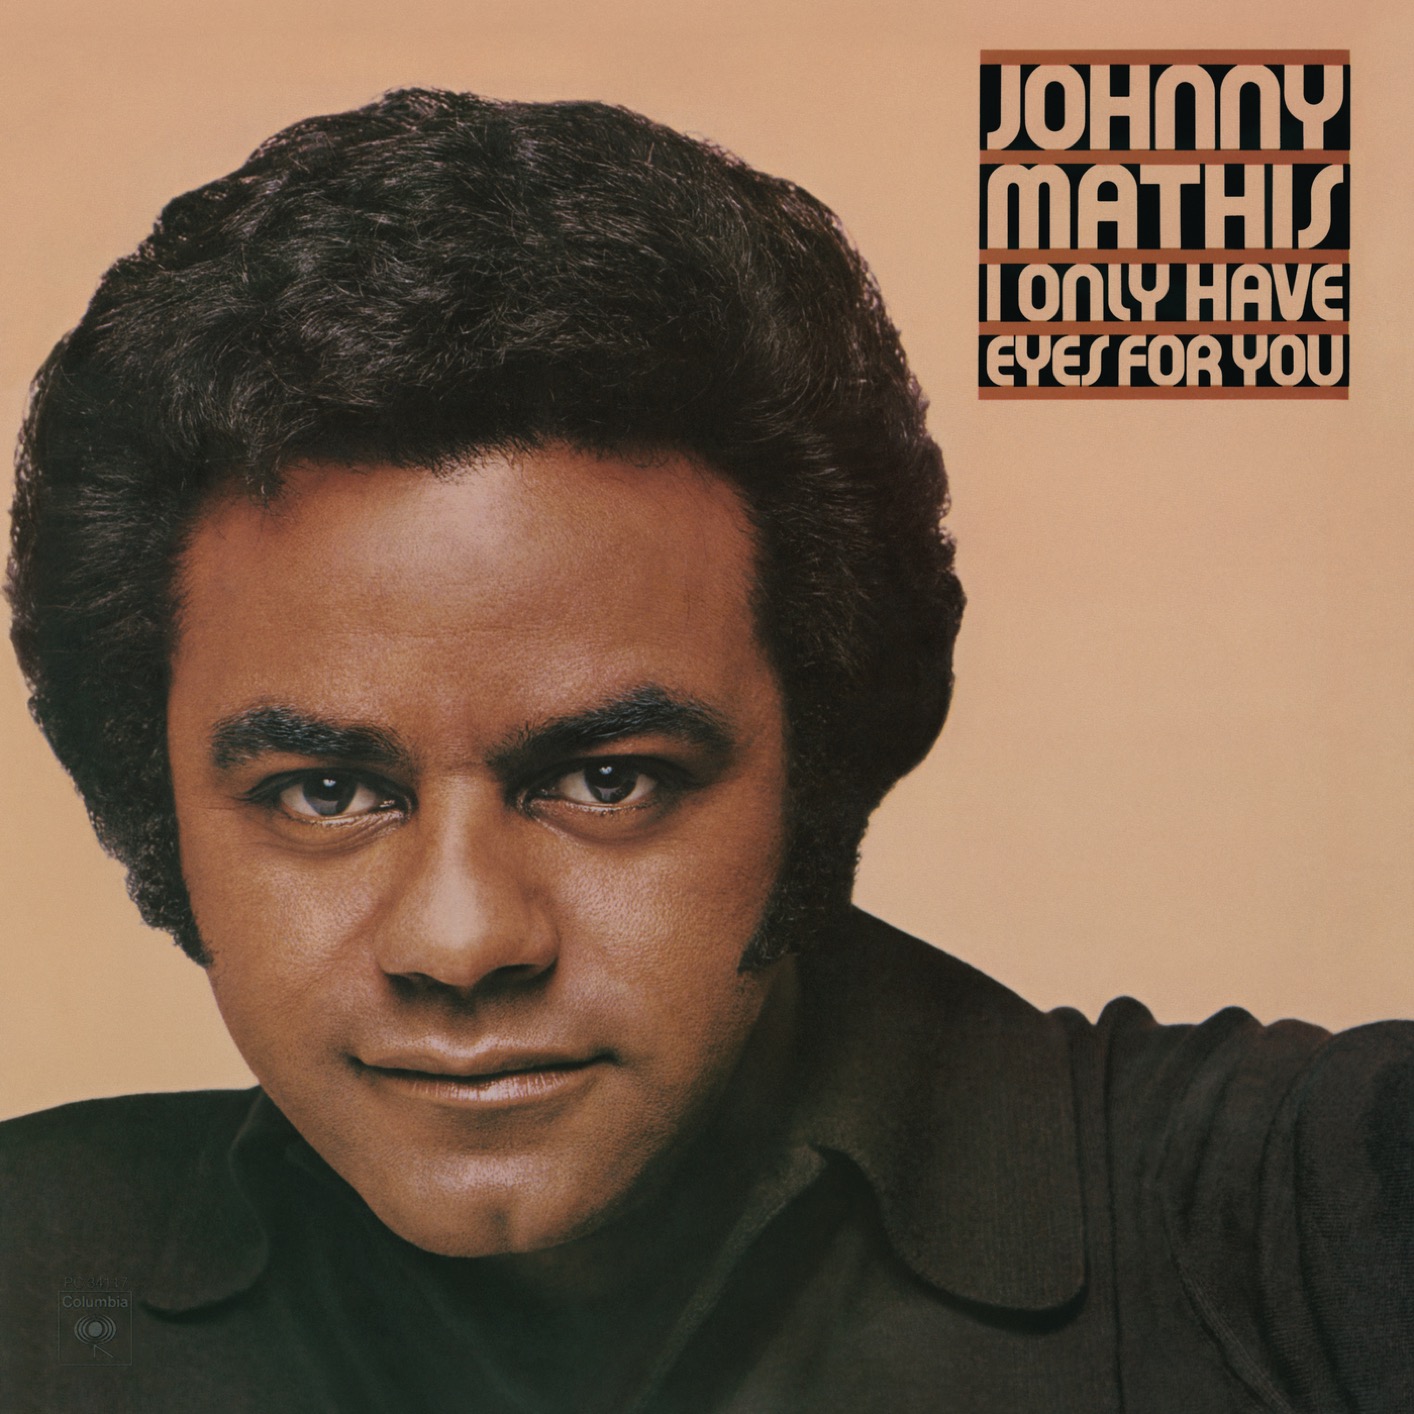 Johnny Mathis – I Only Have Eyes For You (1976/2018) [FLAC 24bit/96kHz]